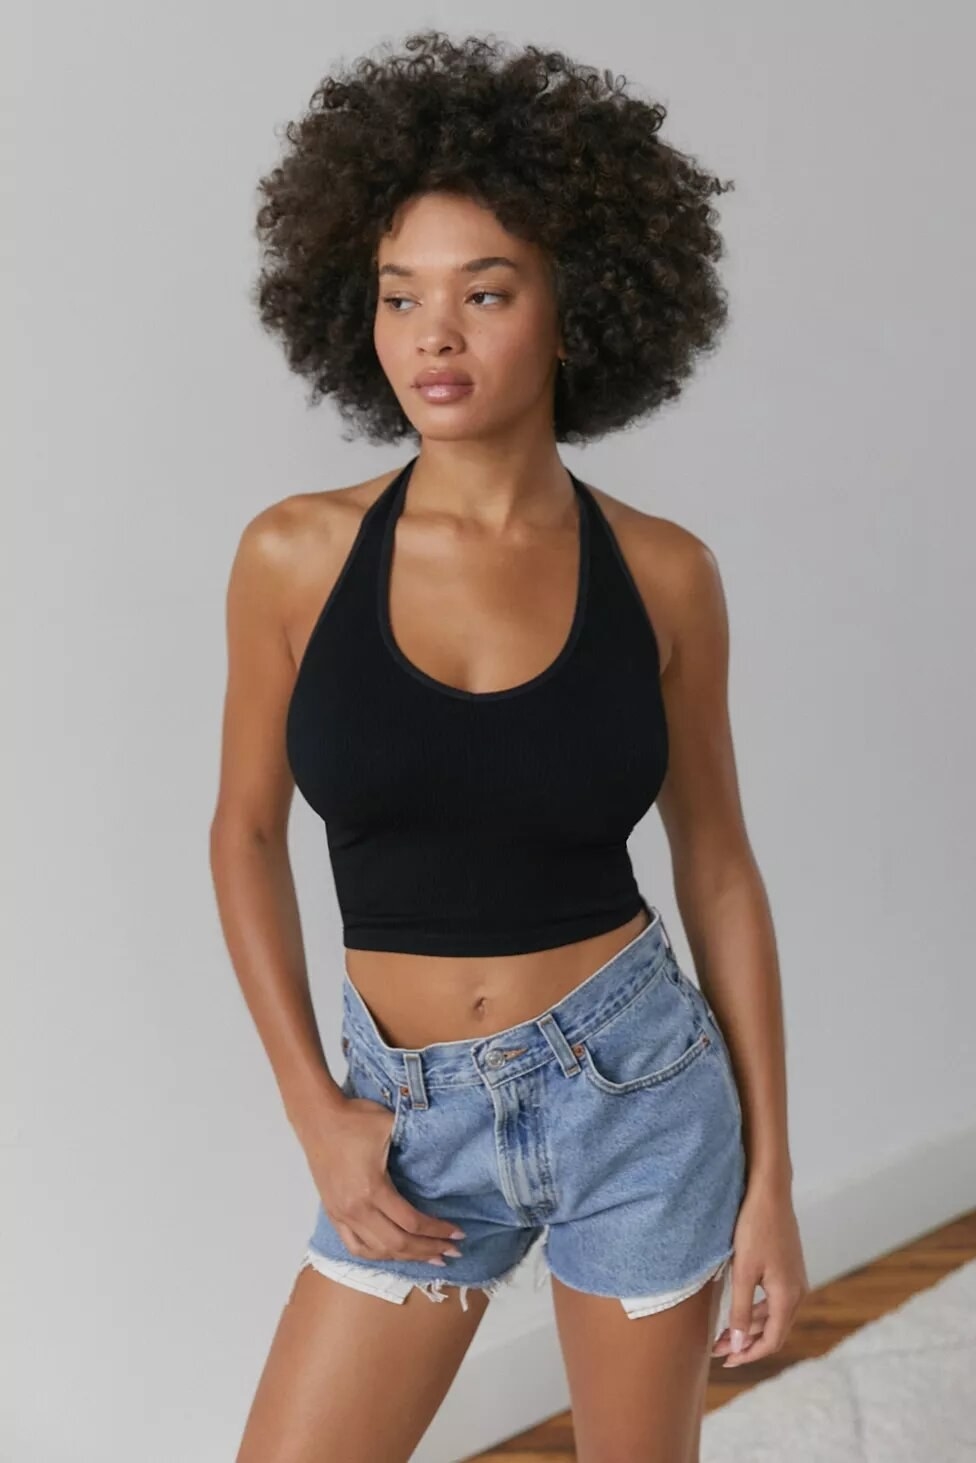 Person wearing halter bra top and jean shorts